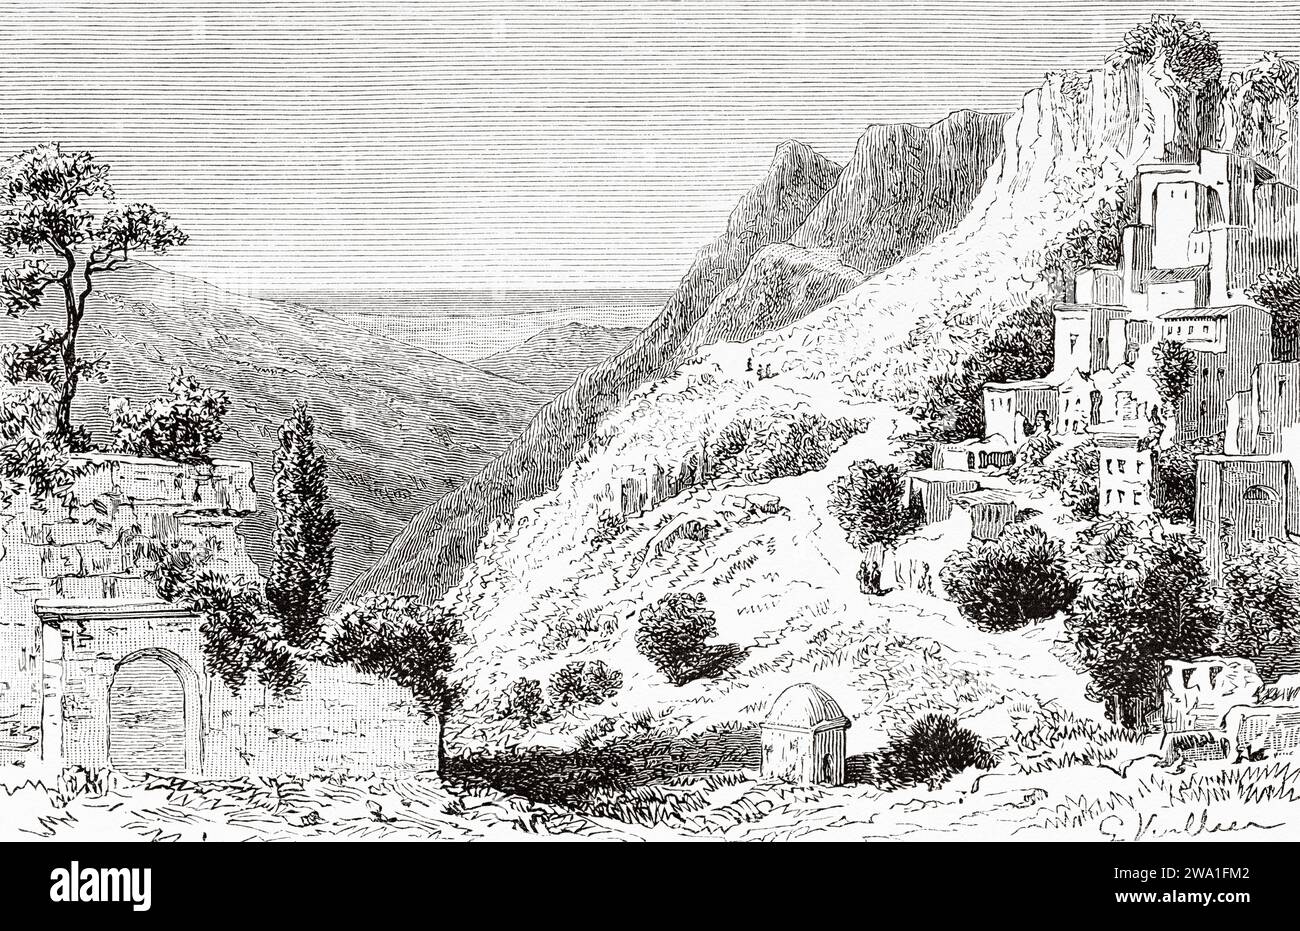 The Belen Pass, known in antiquity as the Syrian Gates is a pass through the Nur Mountains located in the Belen District of Hatay Province in south-central Turkey. Travel to Syria 1875-1878 by Charles Louis Lortet (1836 - 1909) Old 19th century engraving from Le Tour du Monde 1880 Stock Photo